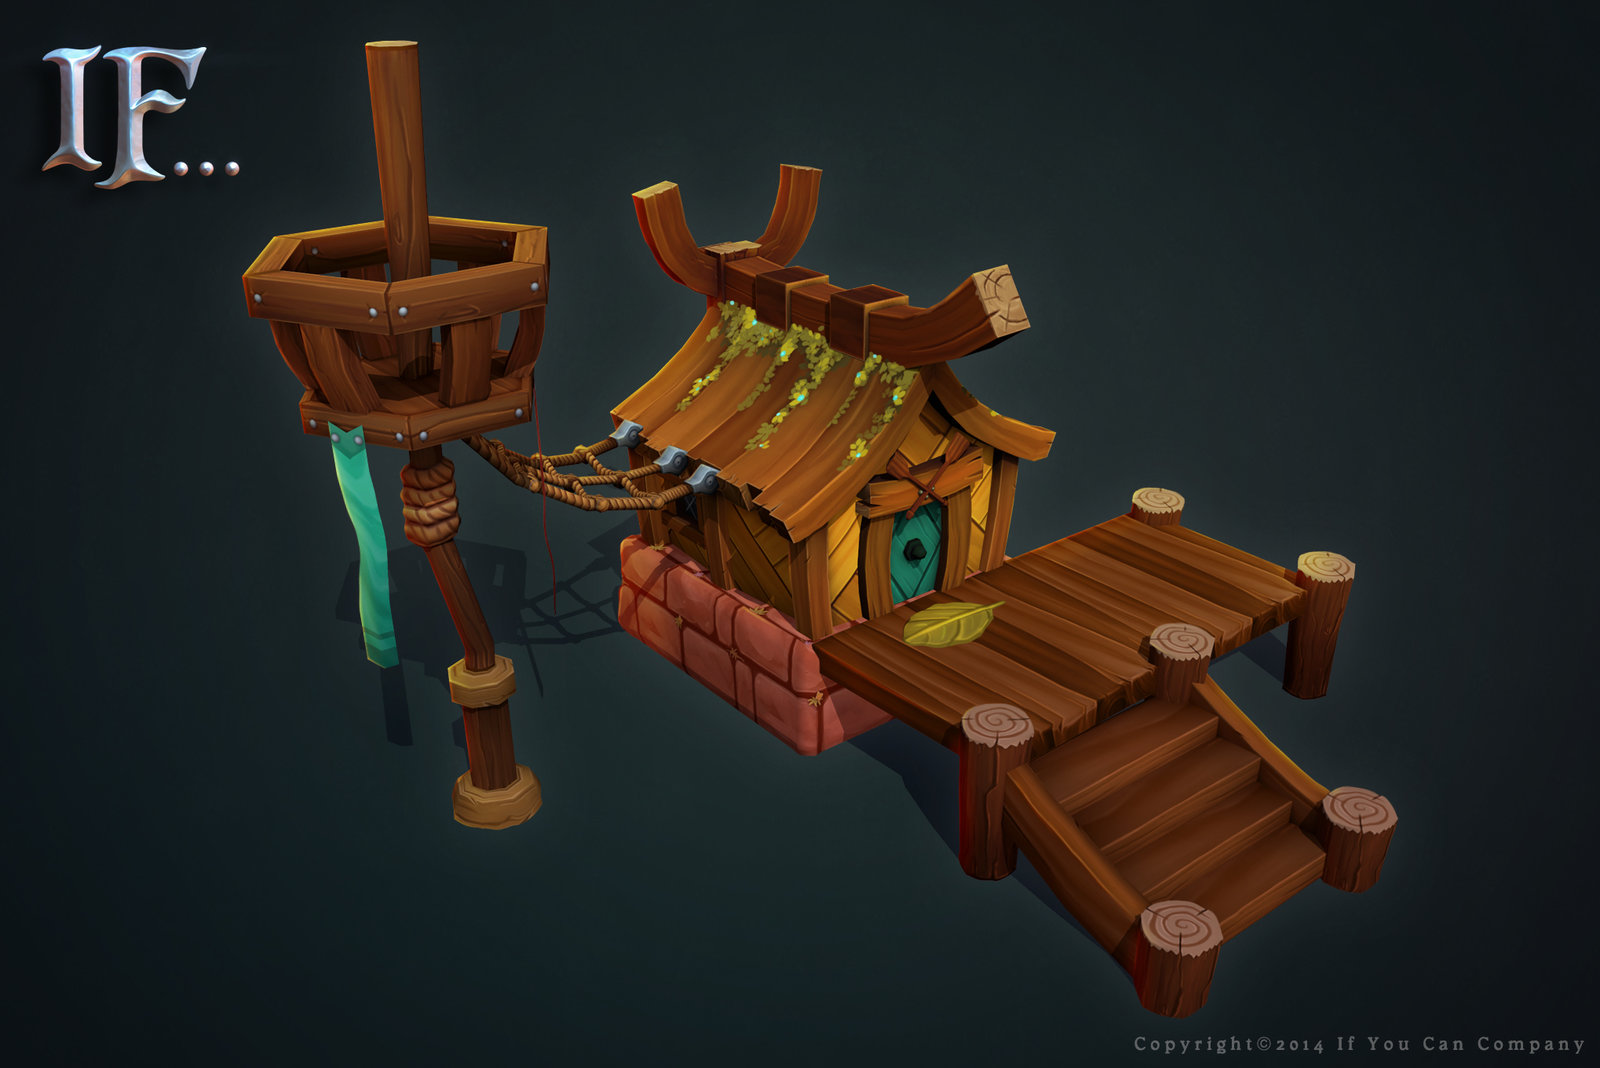 Claypot Canyon Ferryman's Shack. Modeled and textured by me.